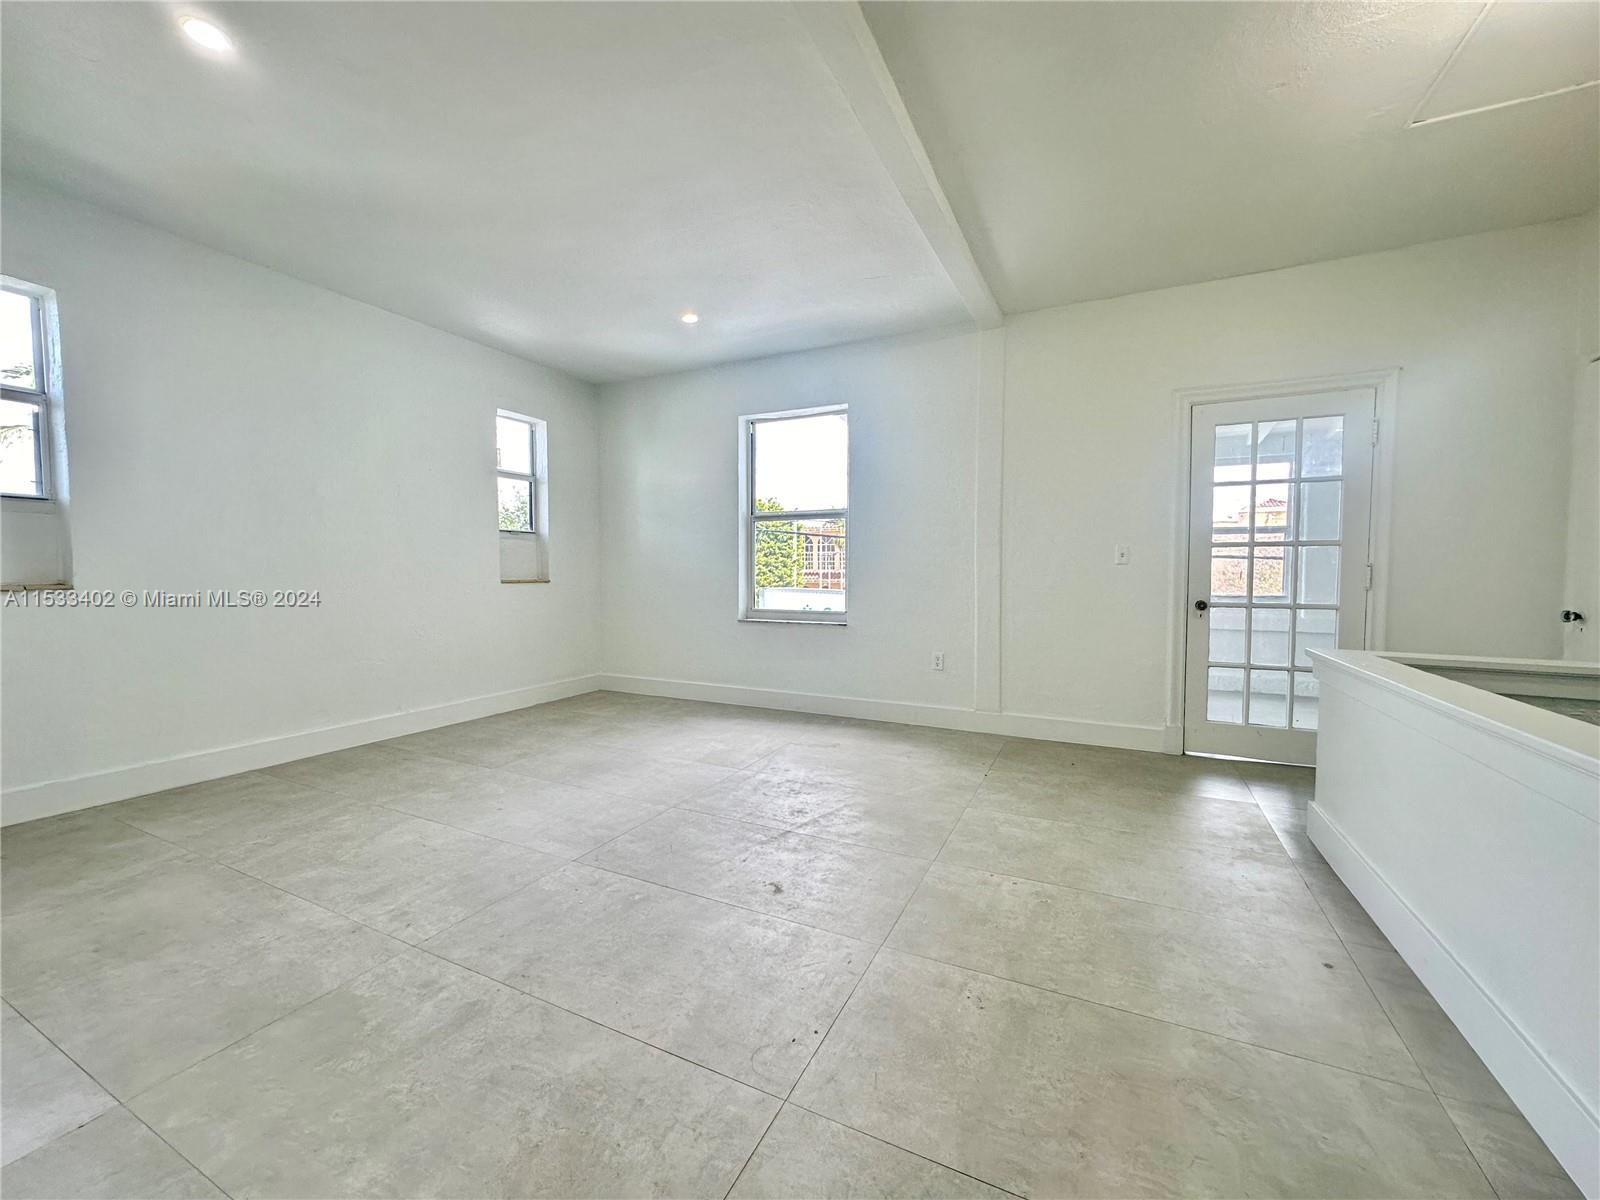 an empty room with windows